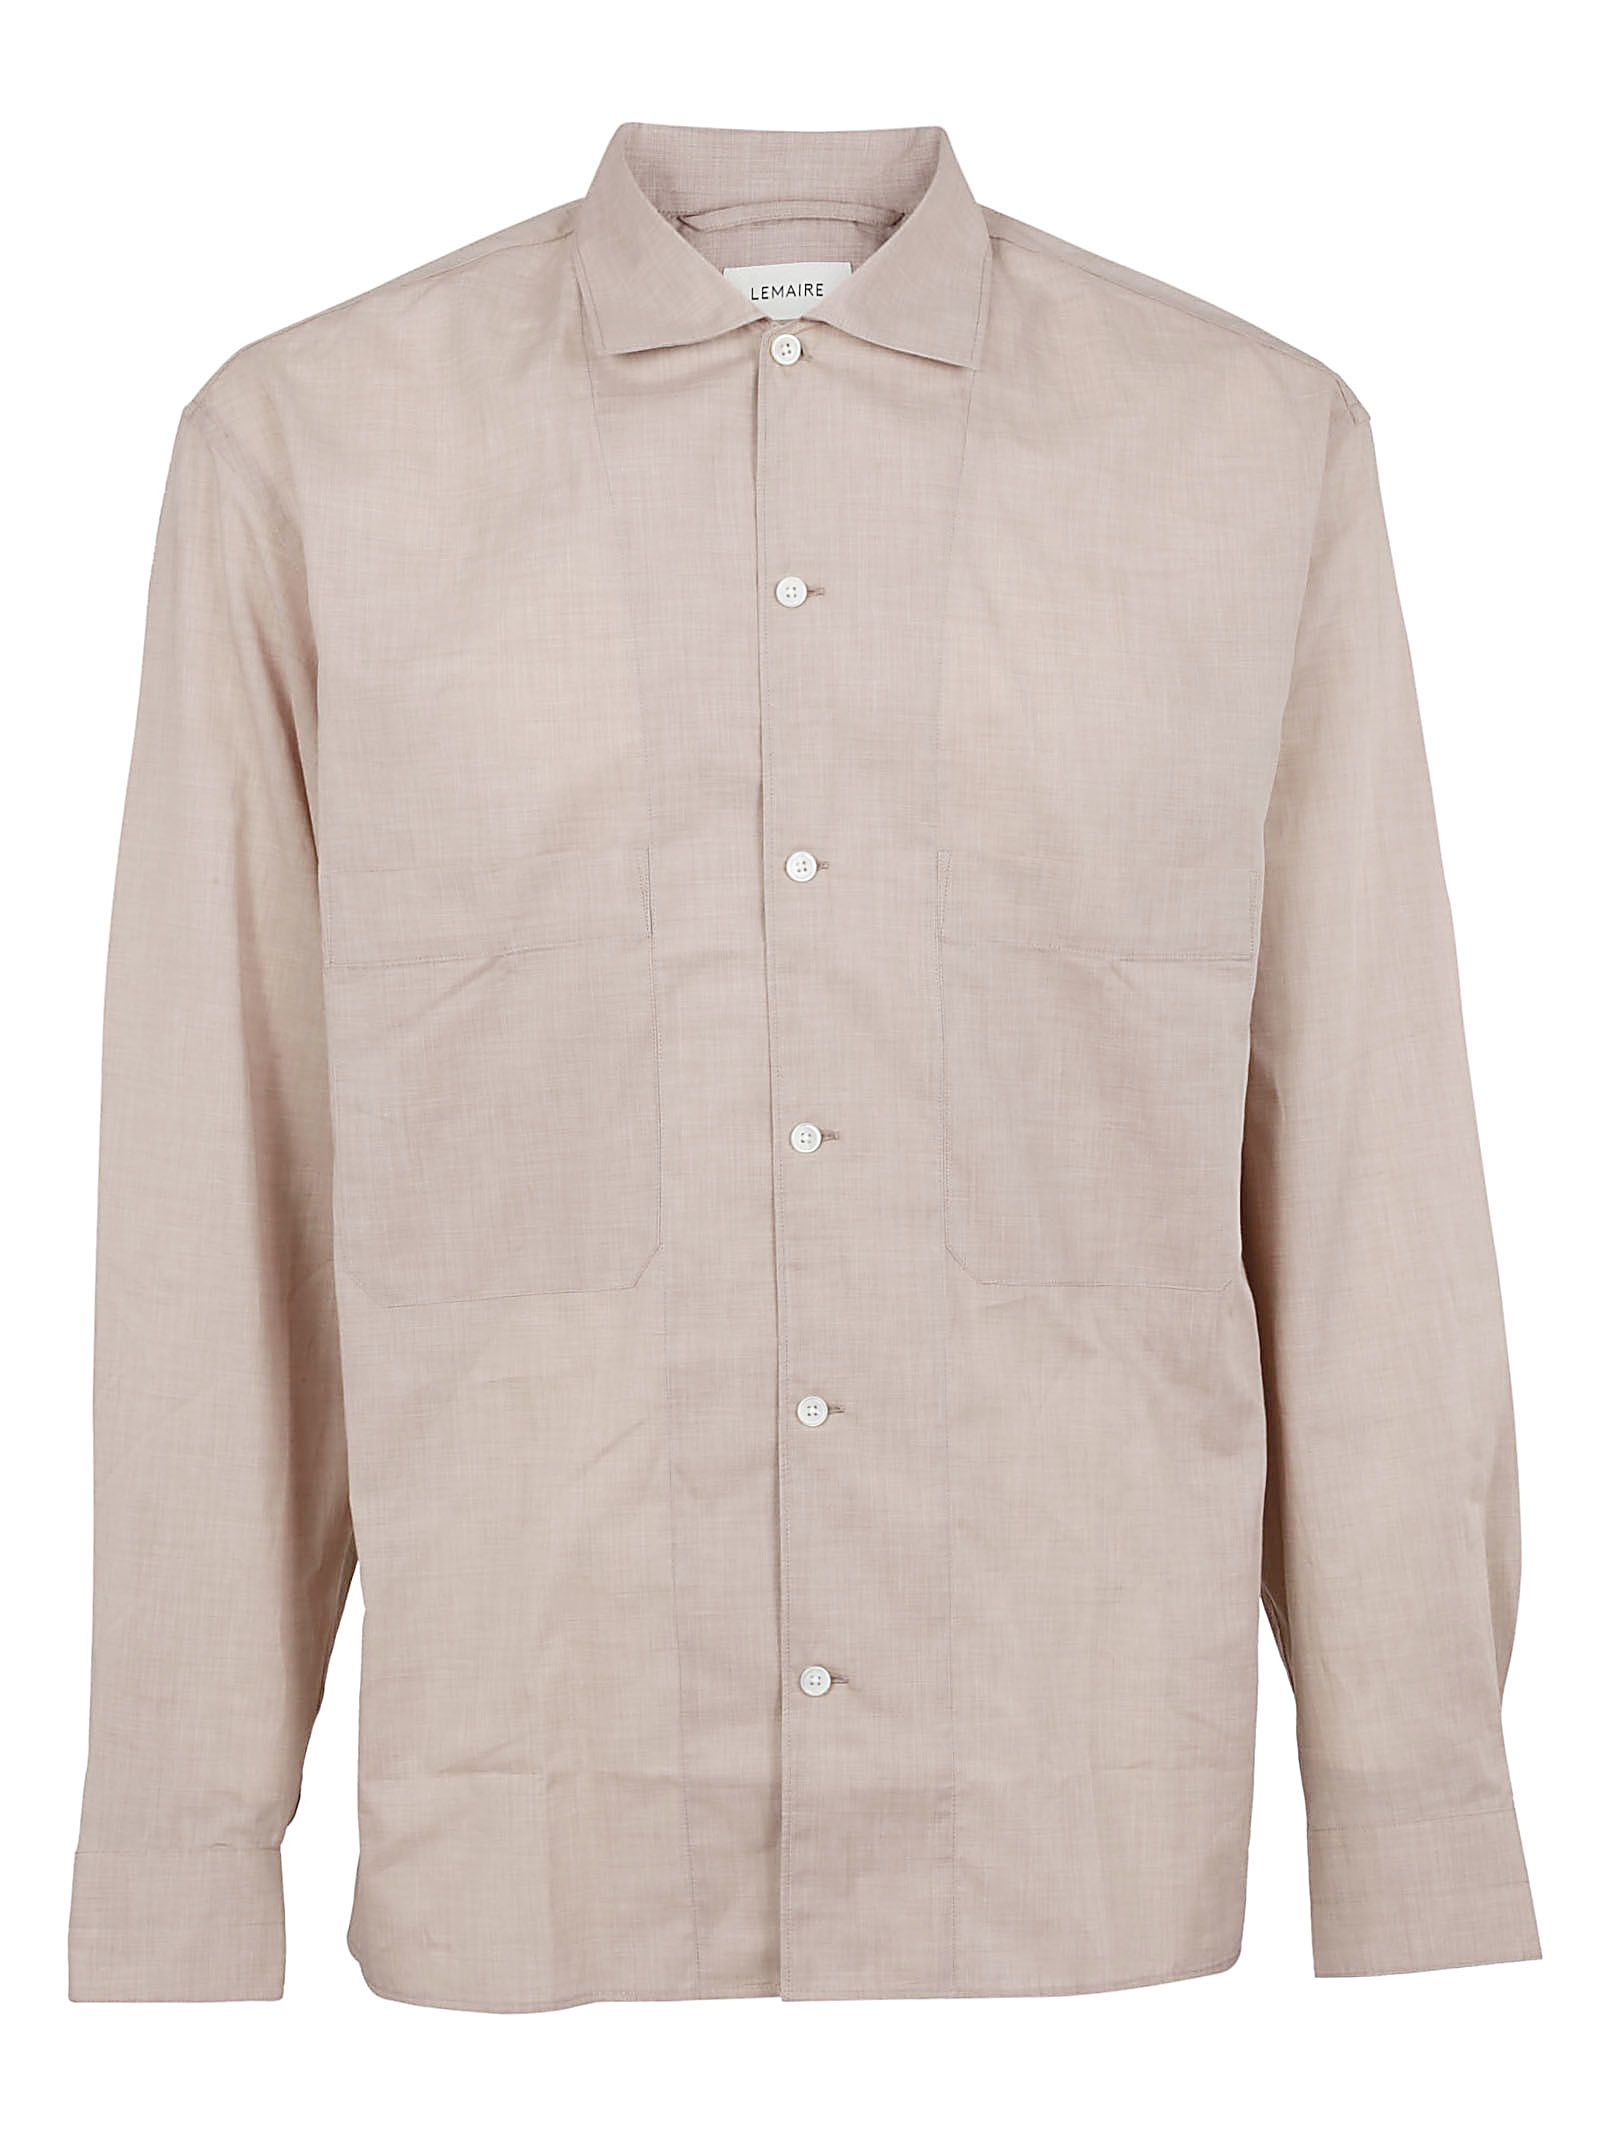 LEMAIRE MILITARY SHIRT,10603298